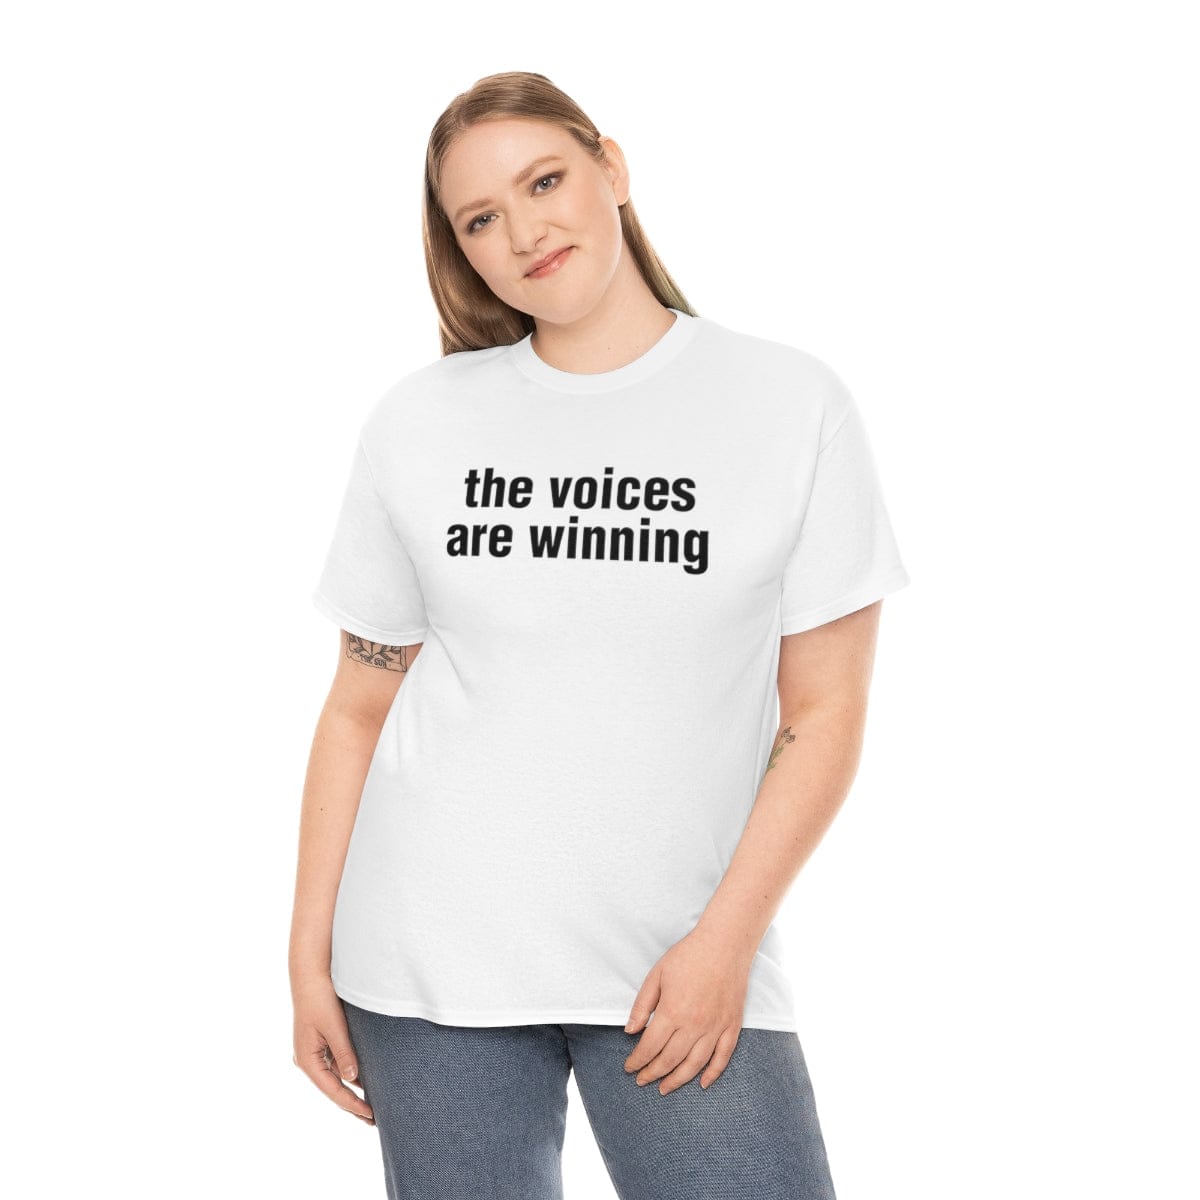 the voices are winning